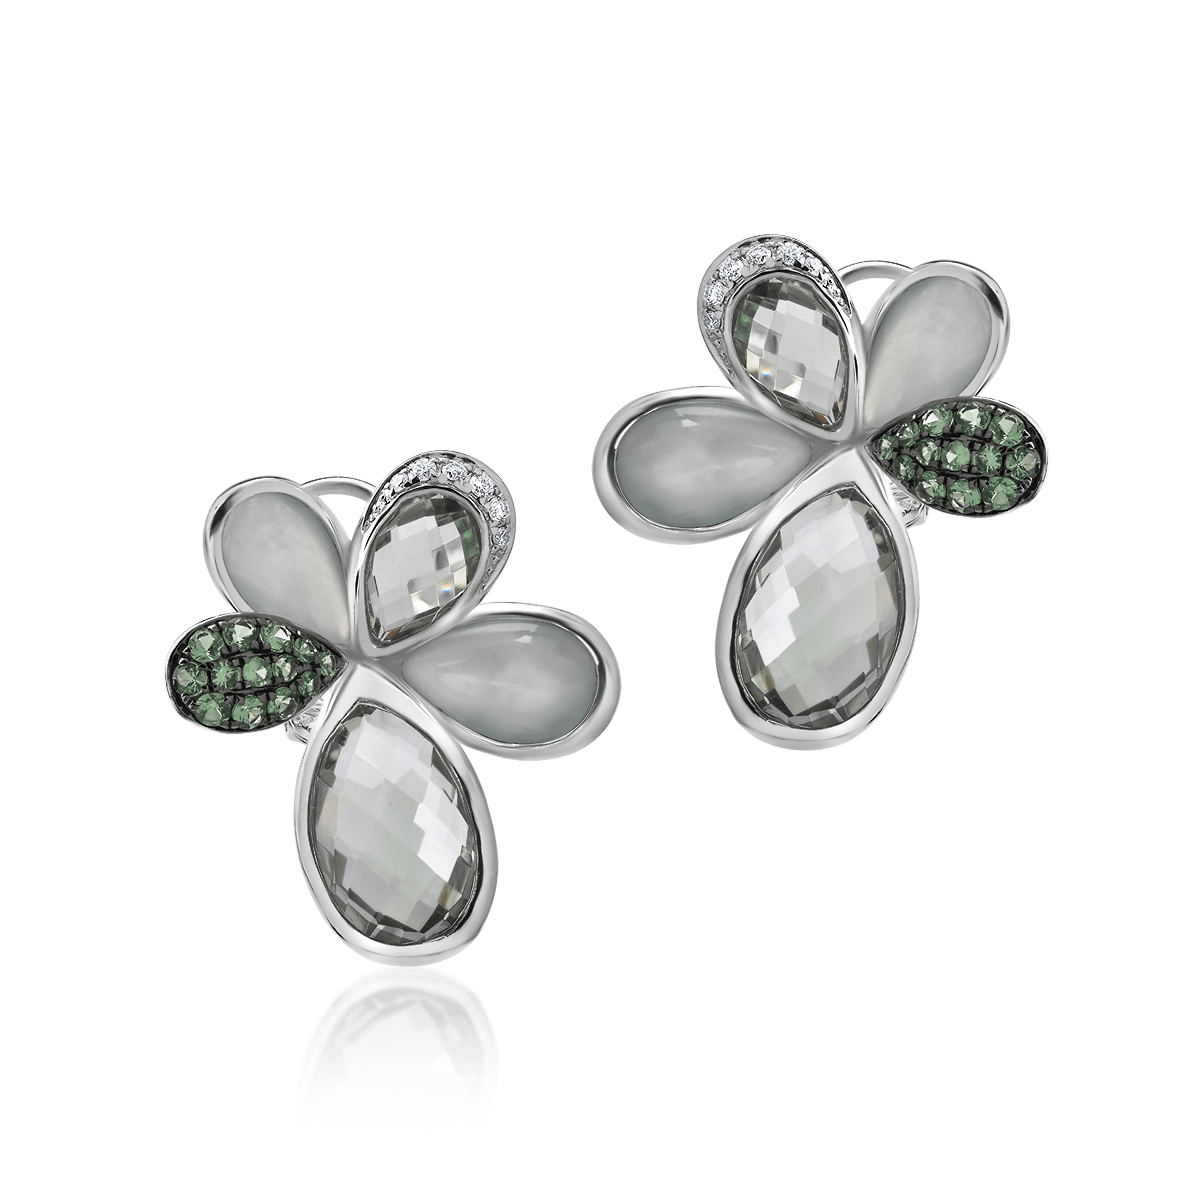 18K white gold earrings with 14.71ct precious and semiprecious stones